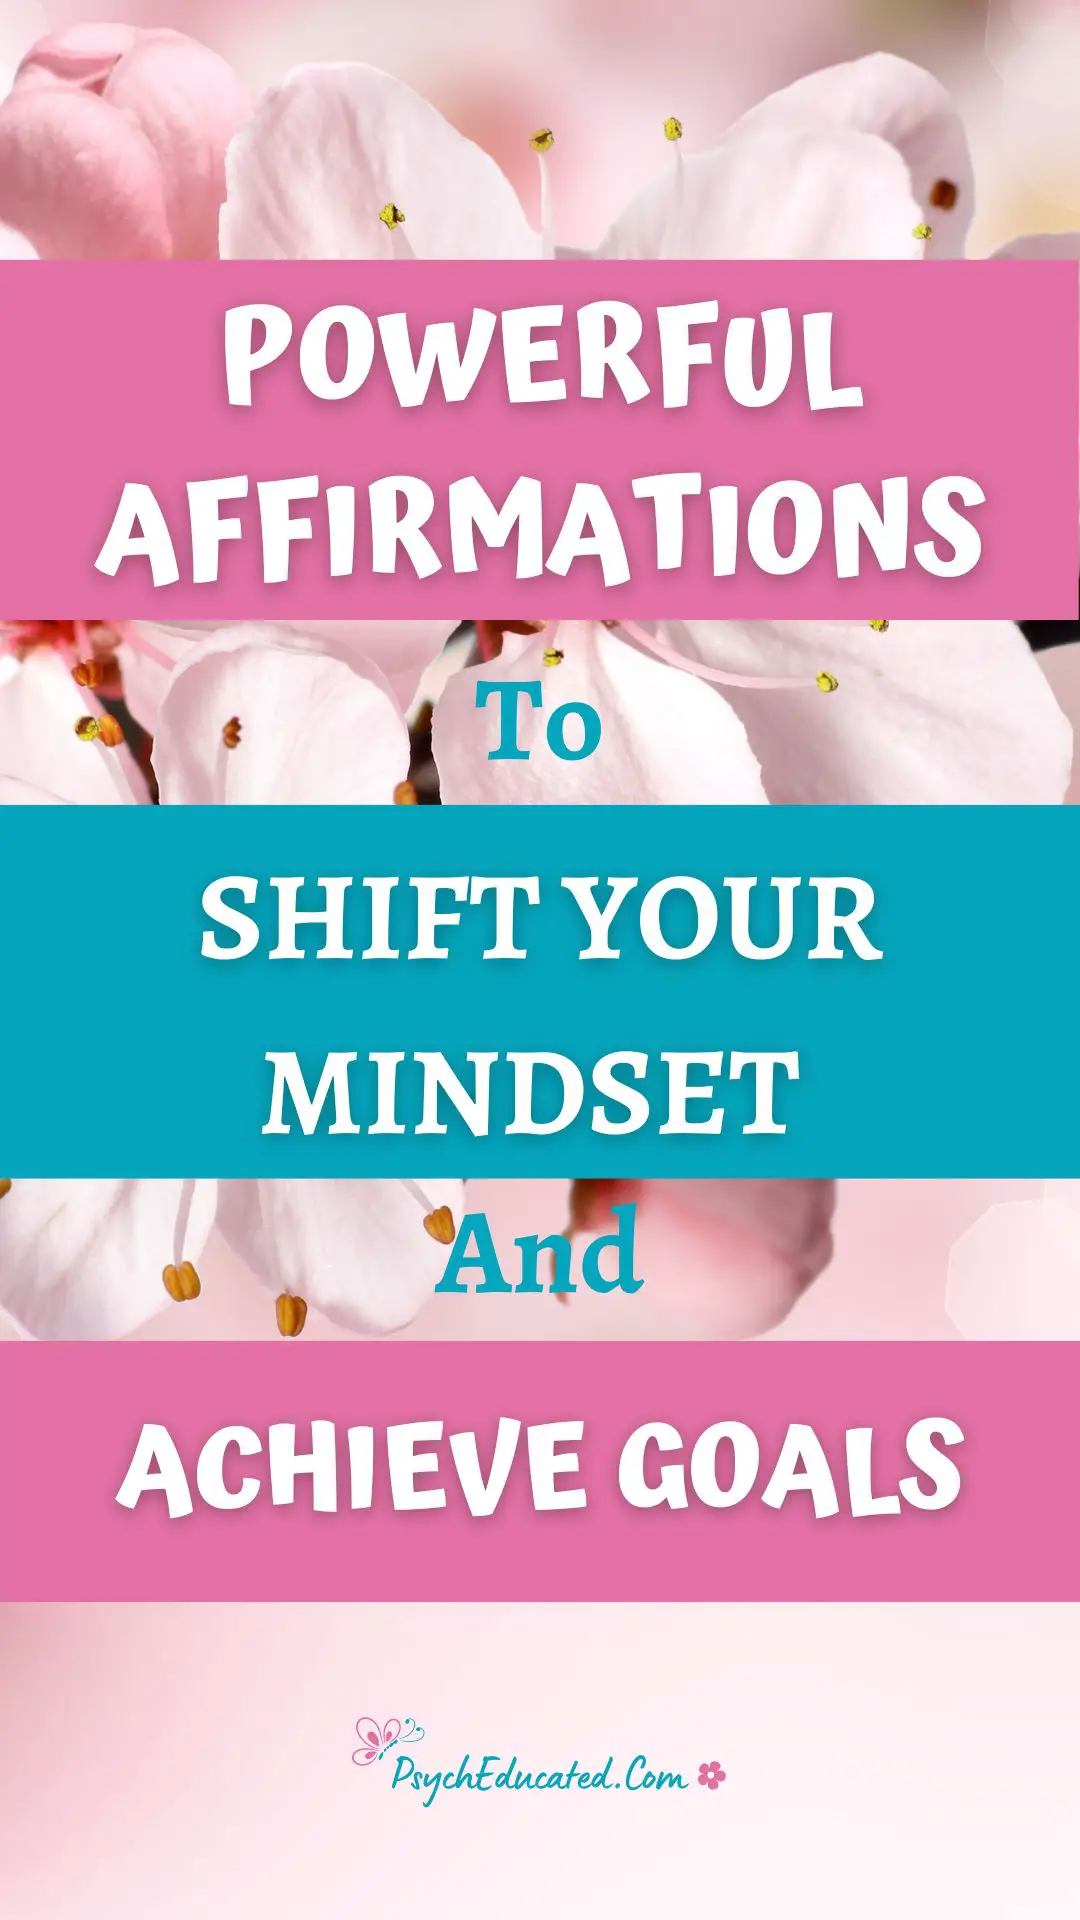 Positive Affirmations To Shift Your Mindset And Achieve Goals